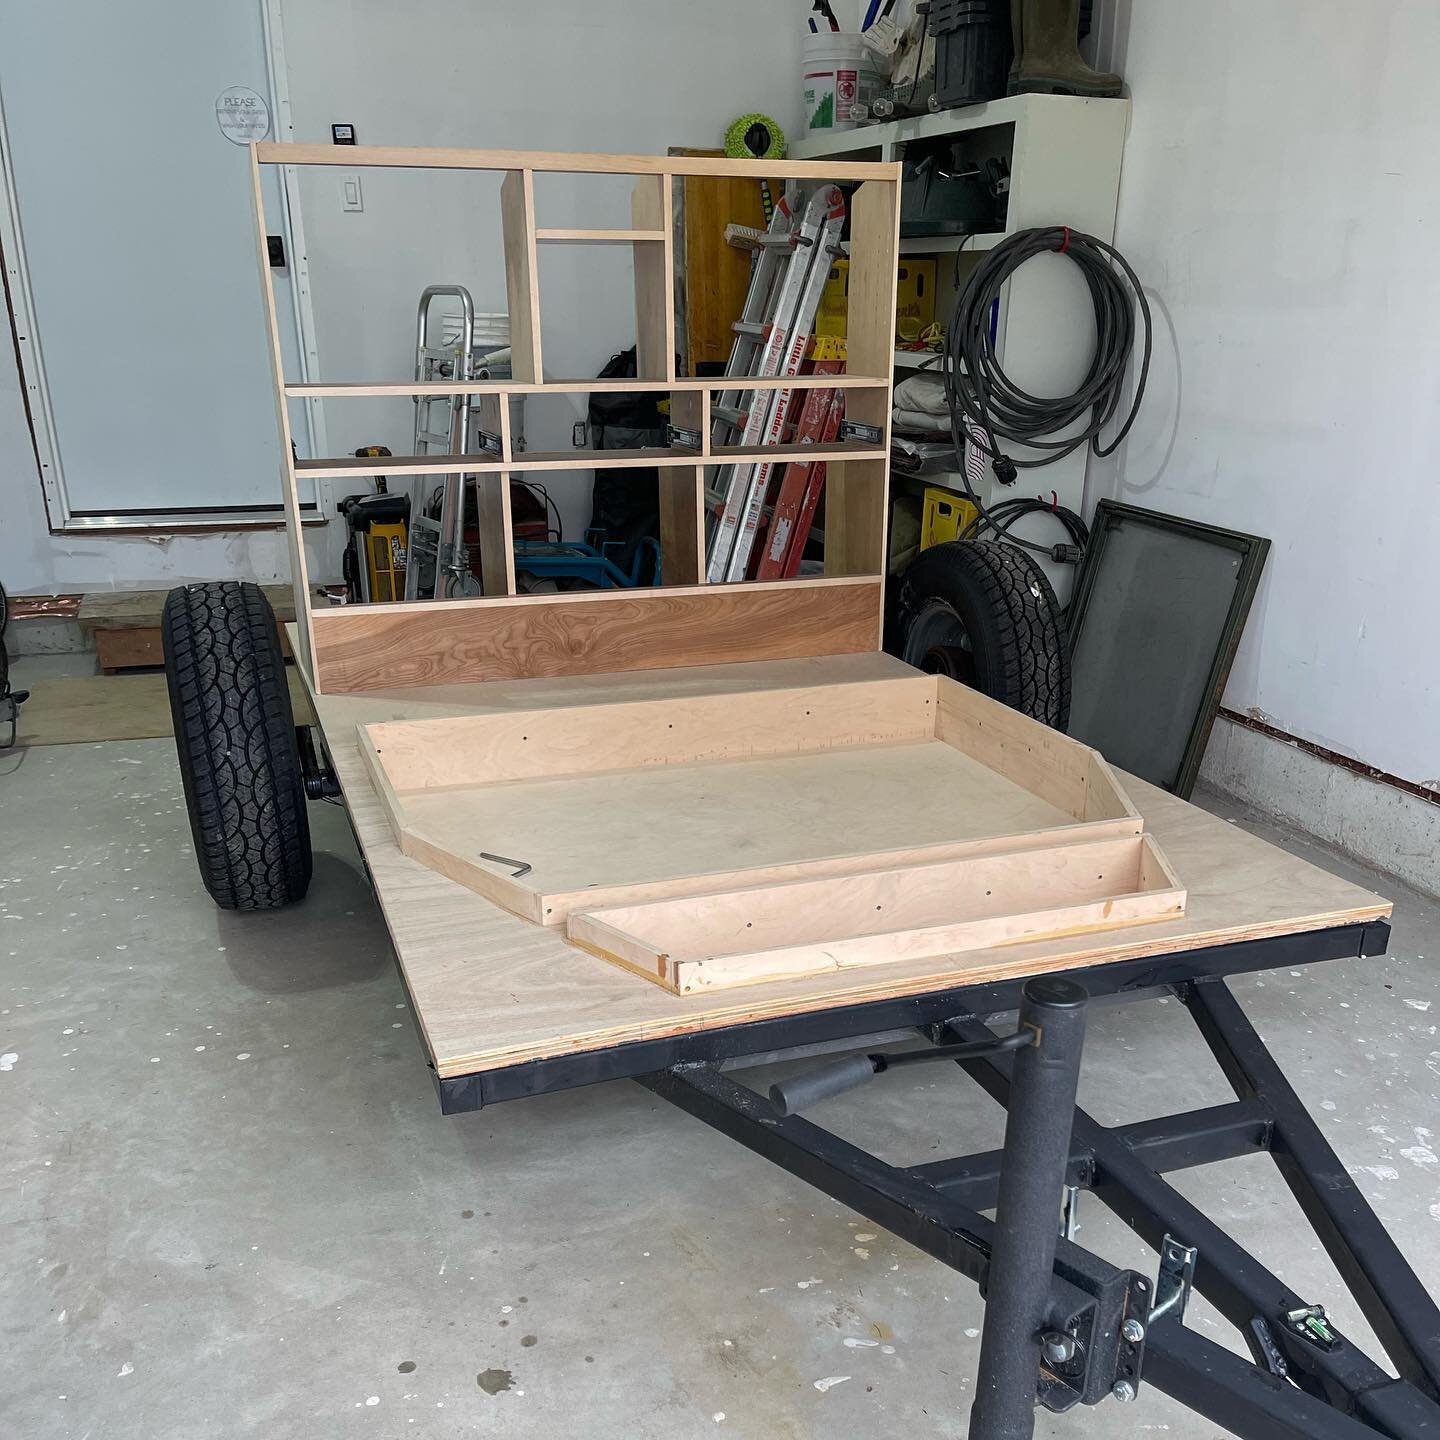 Thank you brothers for helping me move the chassis into the garage and carry teardrop pieces upstairs! 

&hellip;

#teardropthalassa #teardrop #teardroptrailer #teardropcamper #teardroptrailers #teardropcampers #teardropfans #teardroplife #teardropca